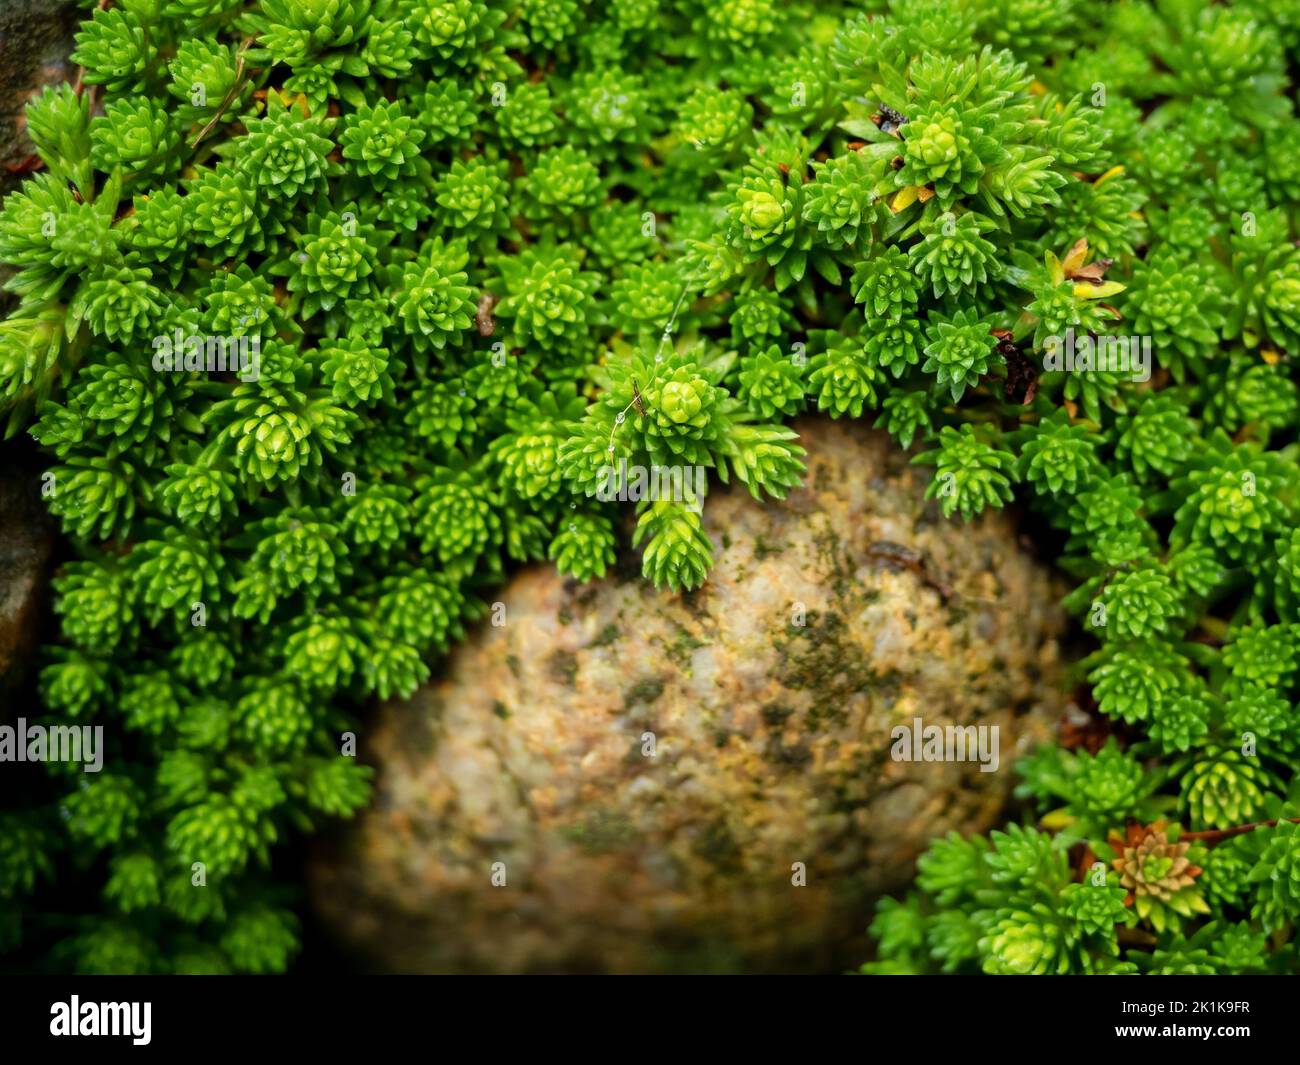 stonecrop plant. sedum plant is the needle-like foliage resembling that of some evergreen shrubs in a rock garden, close up photo, natural background Stock Photo